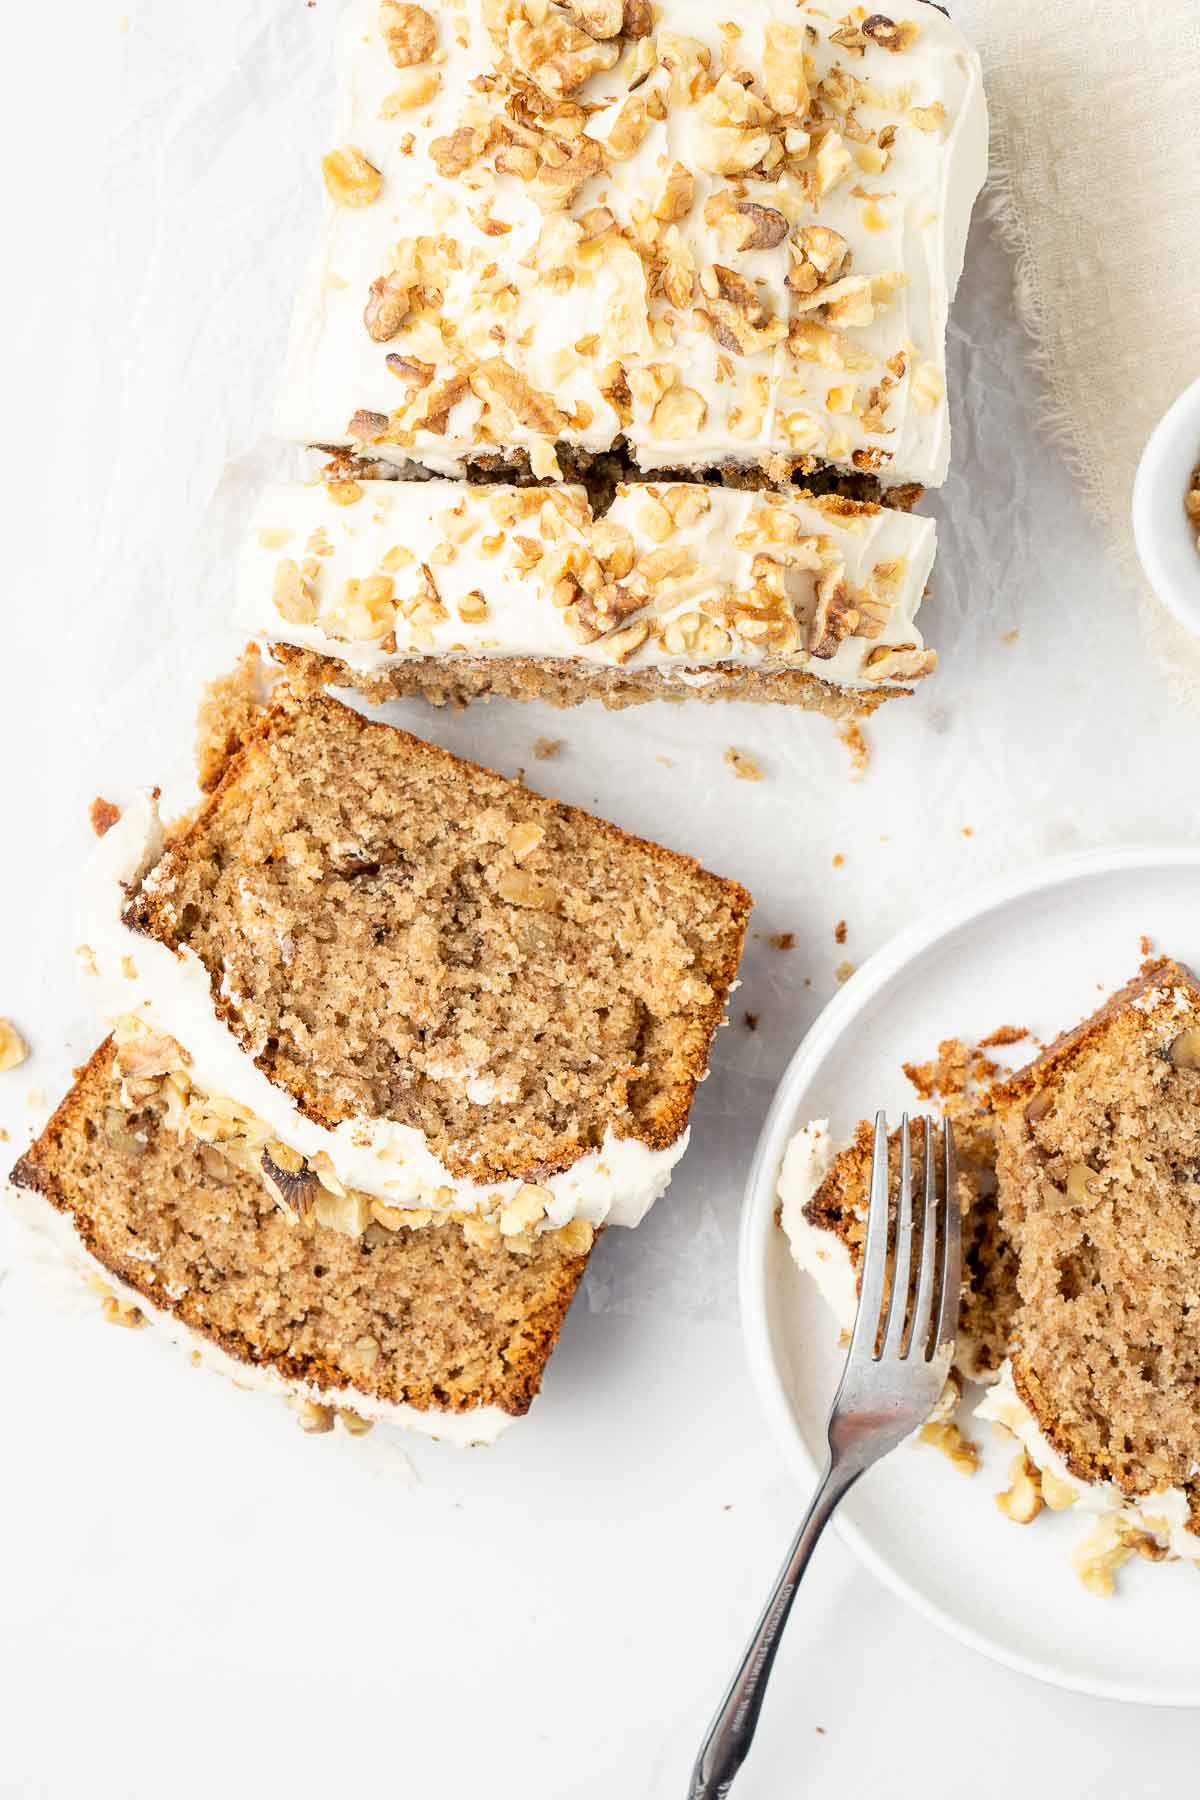 Sliced coffee and walnut cake from above.